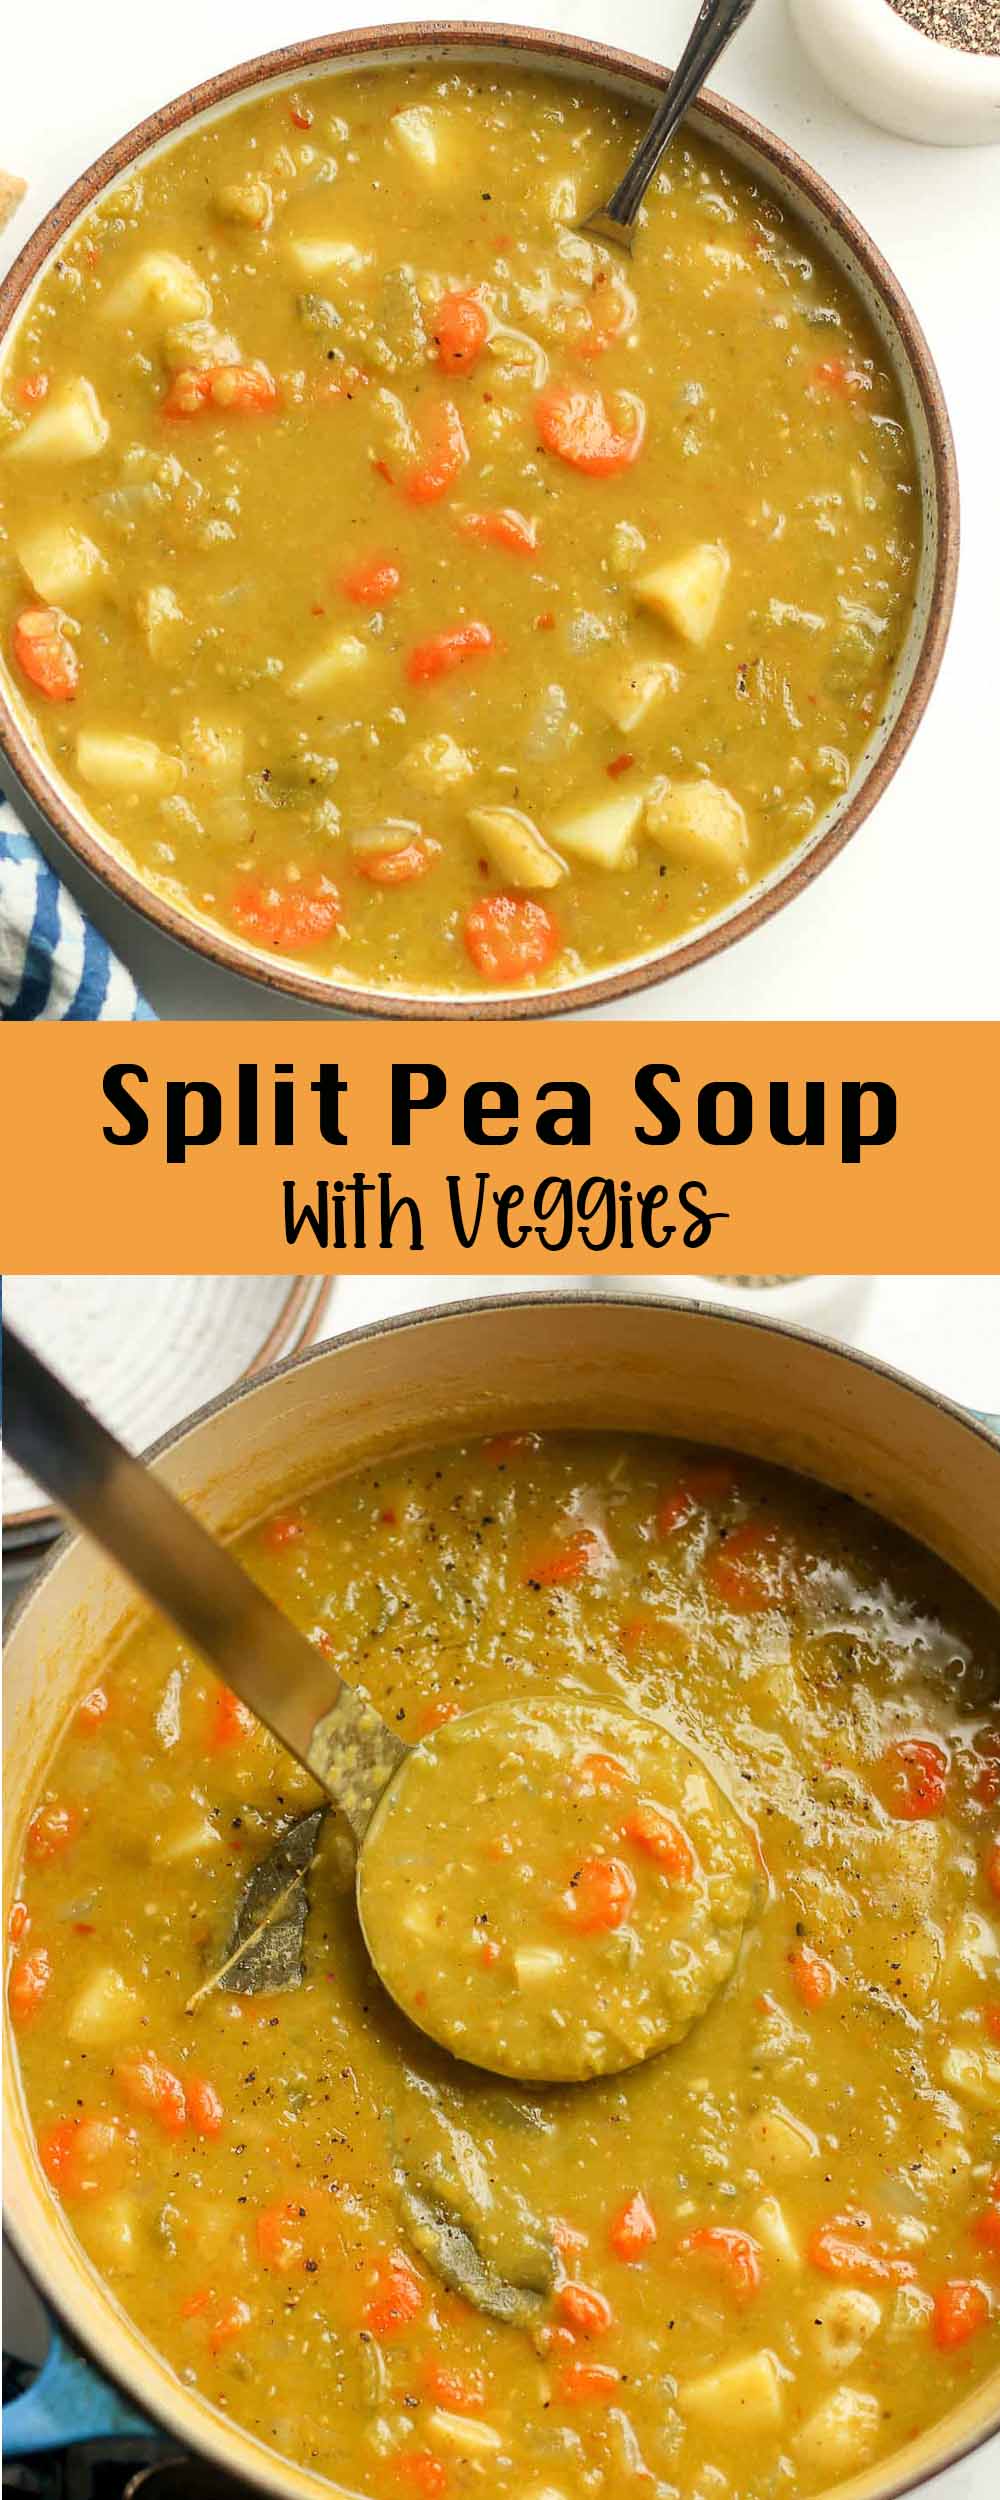 Two photos - one of a bowl of the split pea soup with veggies and another of the pot of soup.